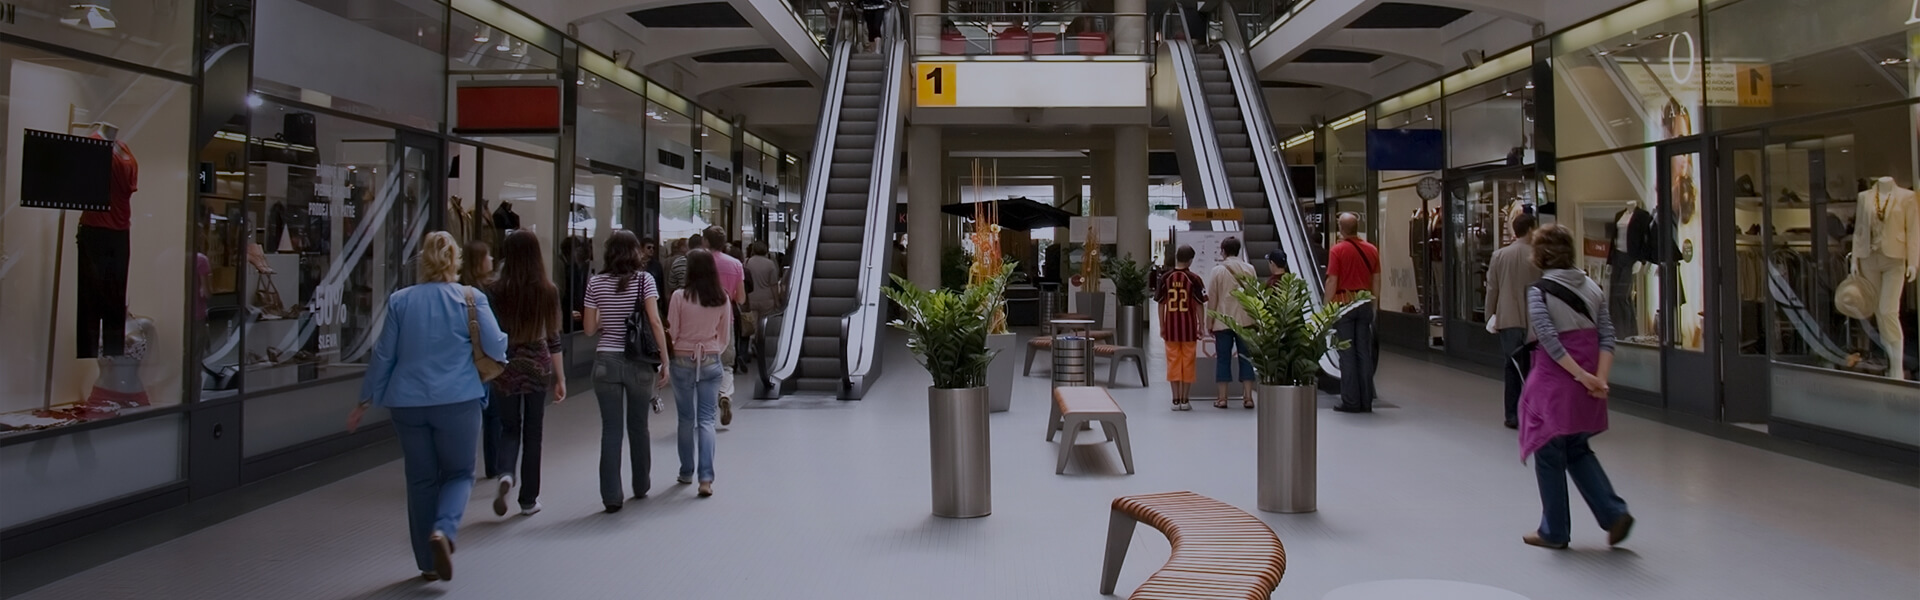 Image of a busy shopping centre with escalators